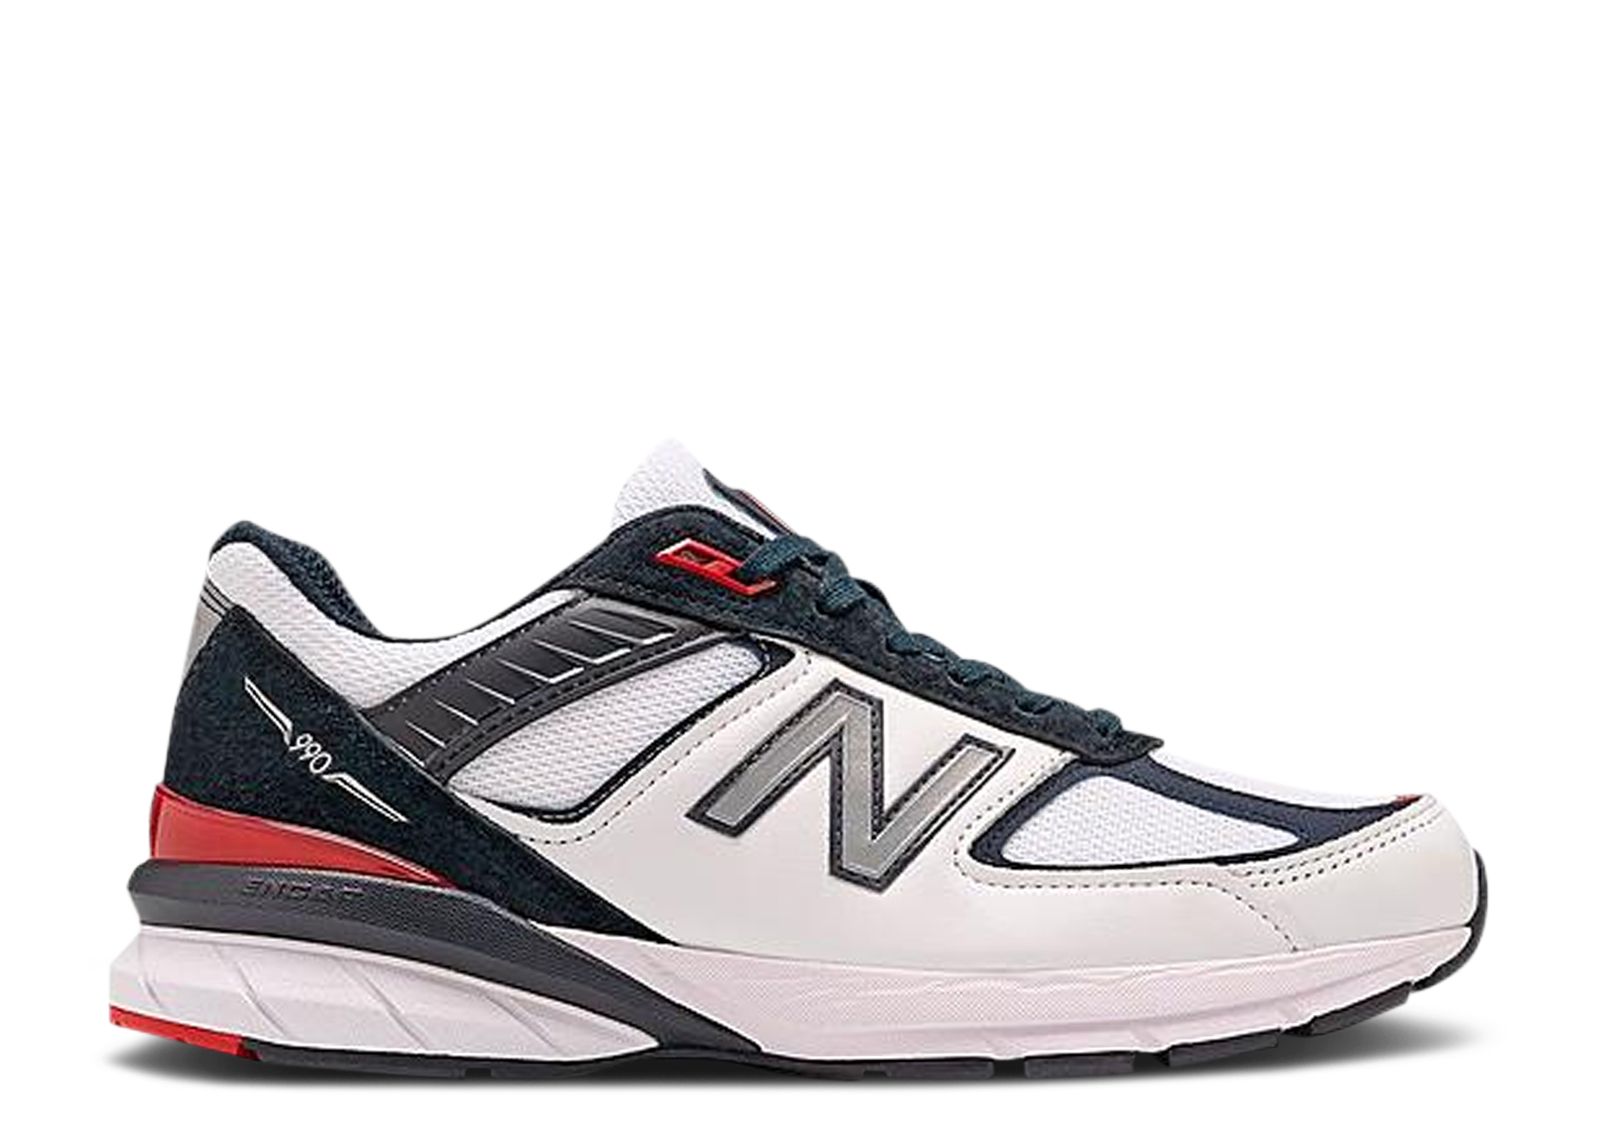 990v5 Made in USA 'White Carbon Red'